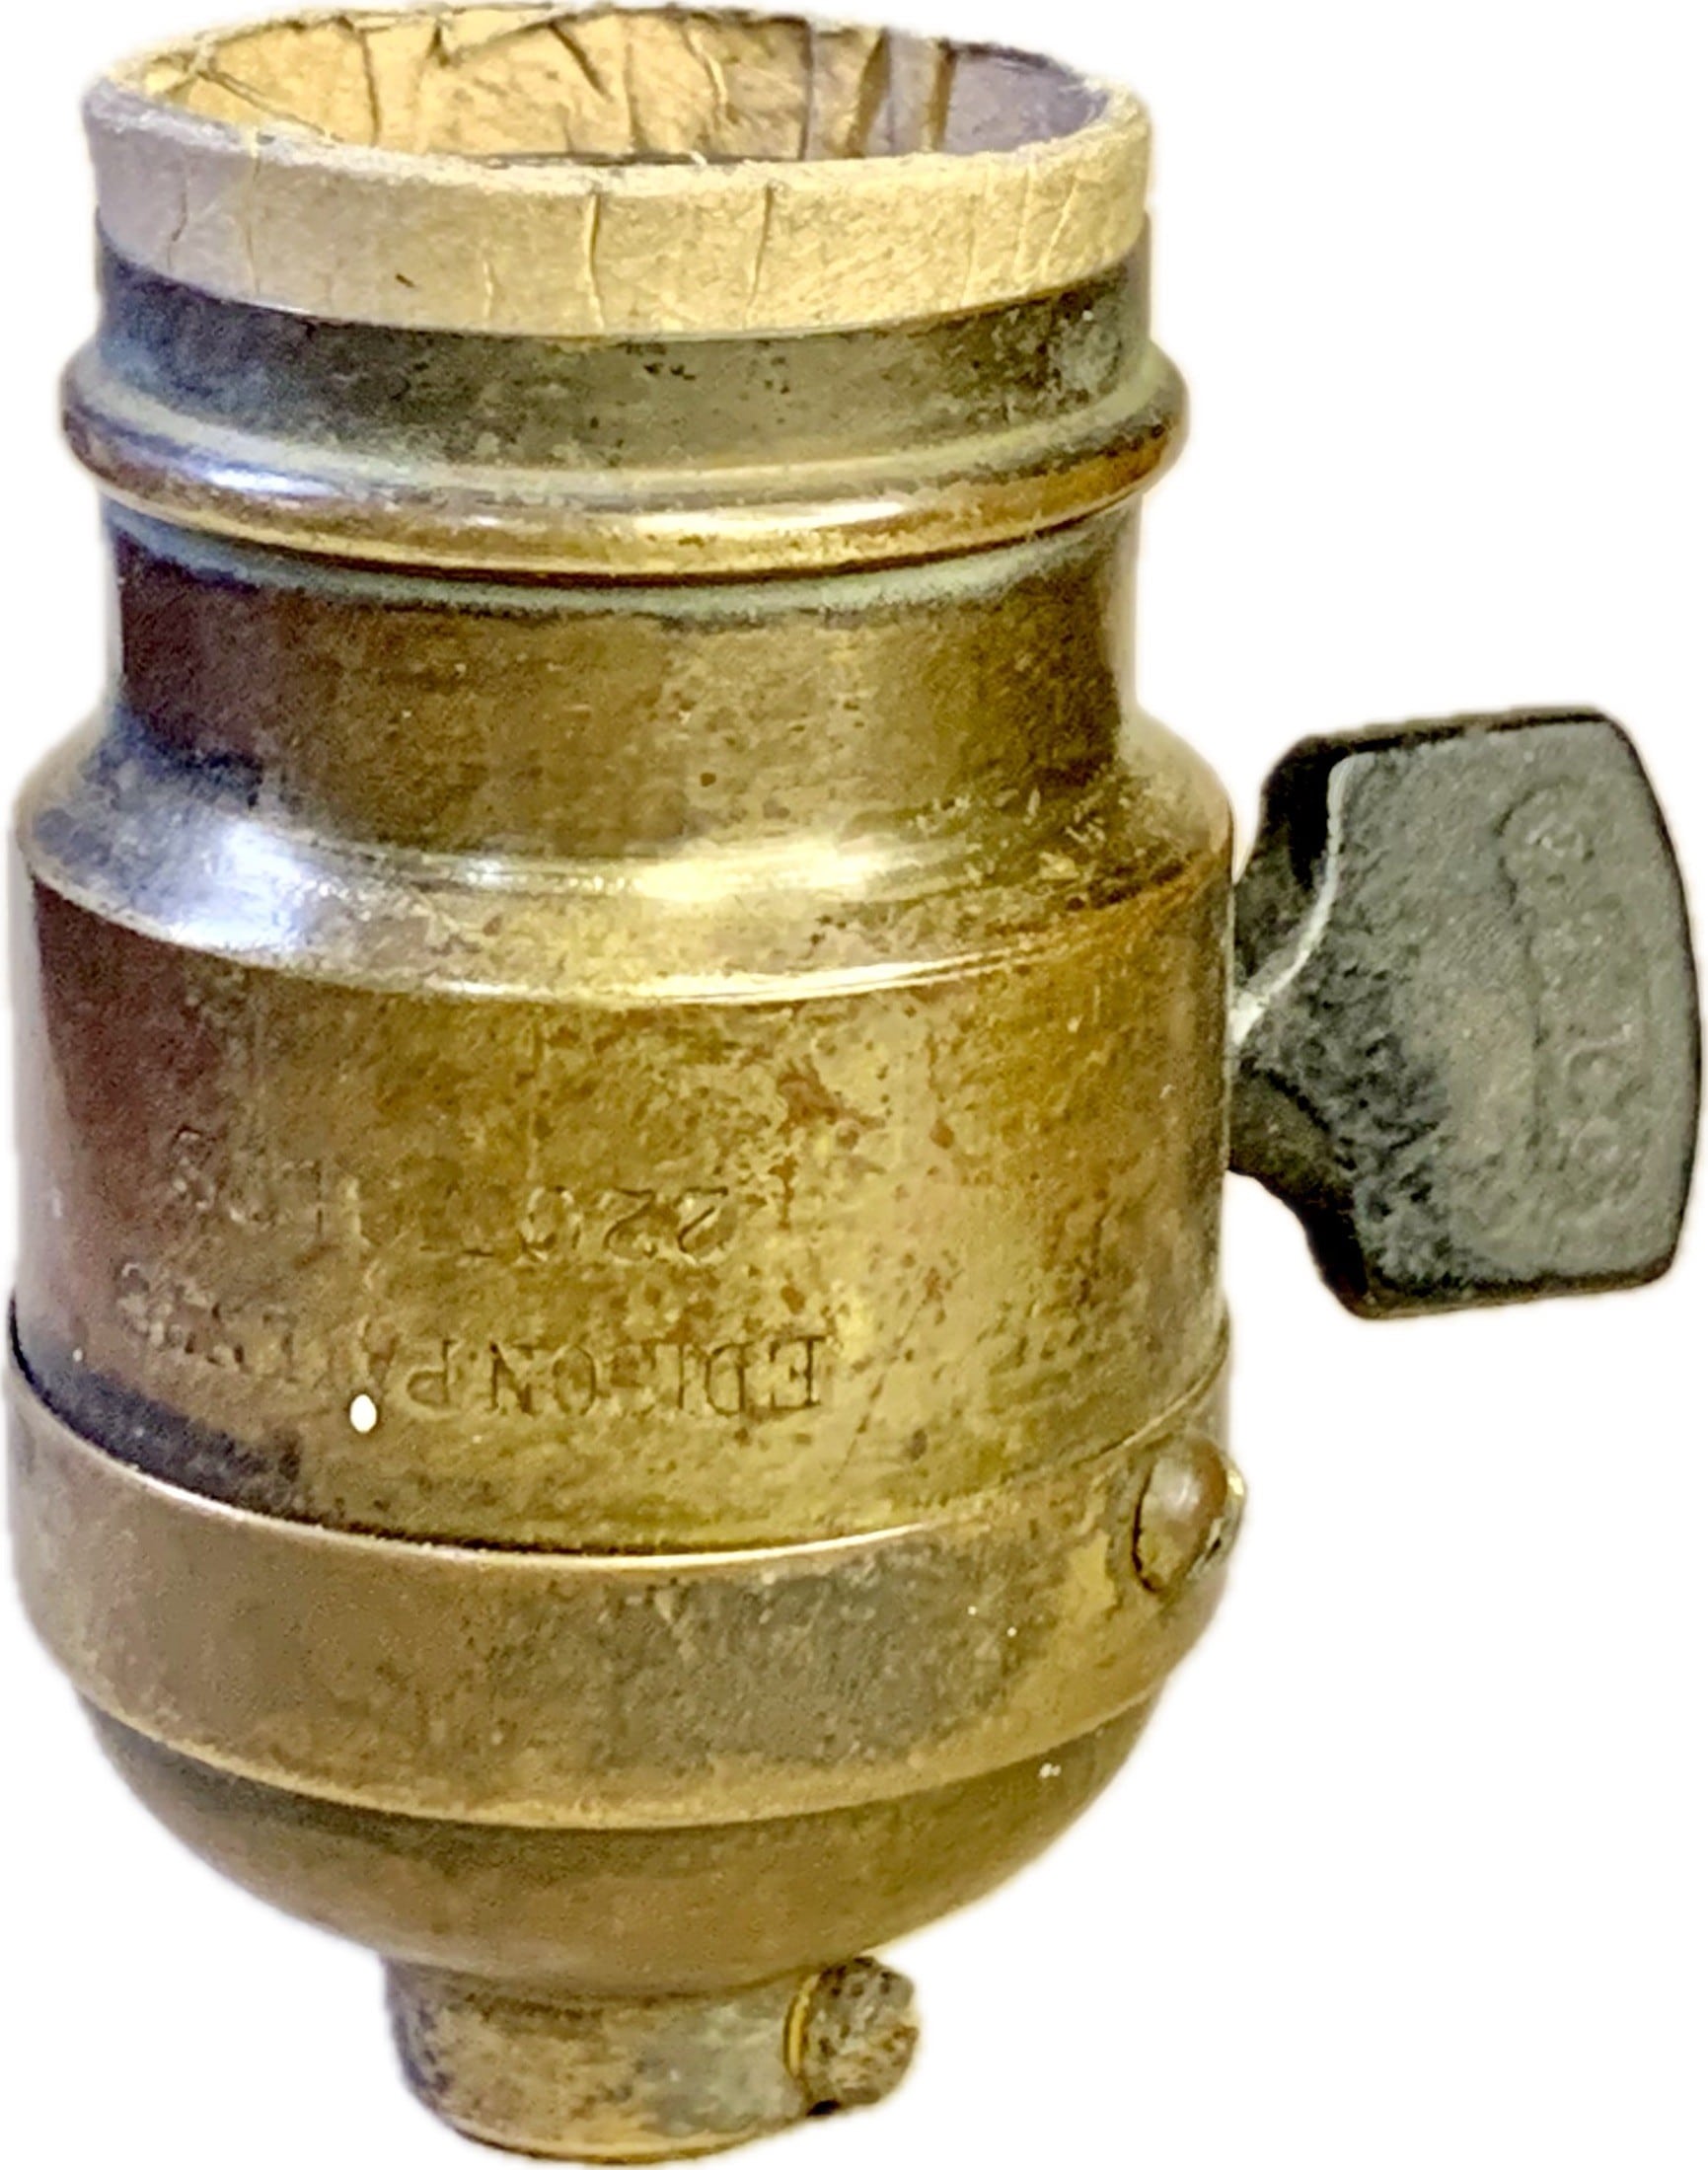 picture shows an early Edison - General Electric turn key socket available at The Lamp Repair Shop.